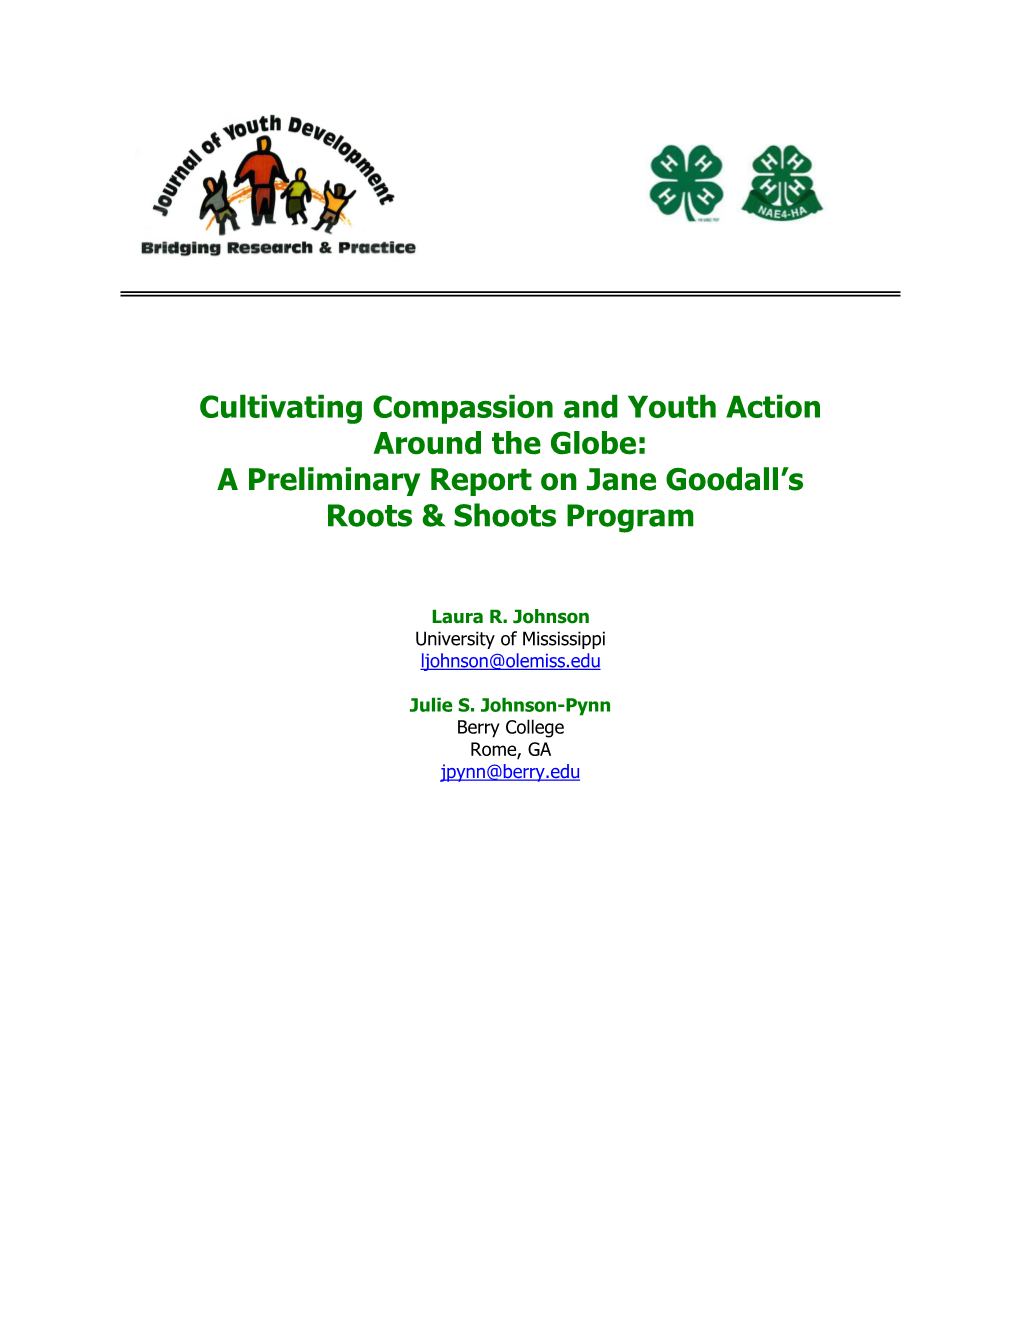 A Preliminary Report on Jane Goodall's Roots & Shoots Program